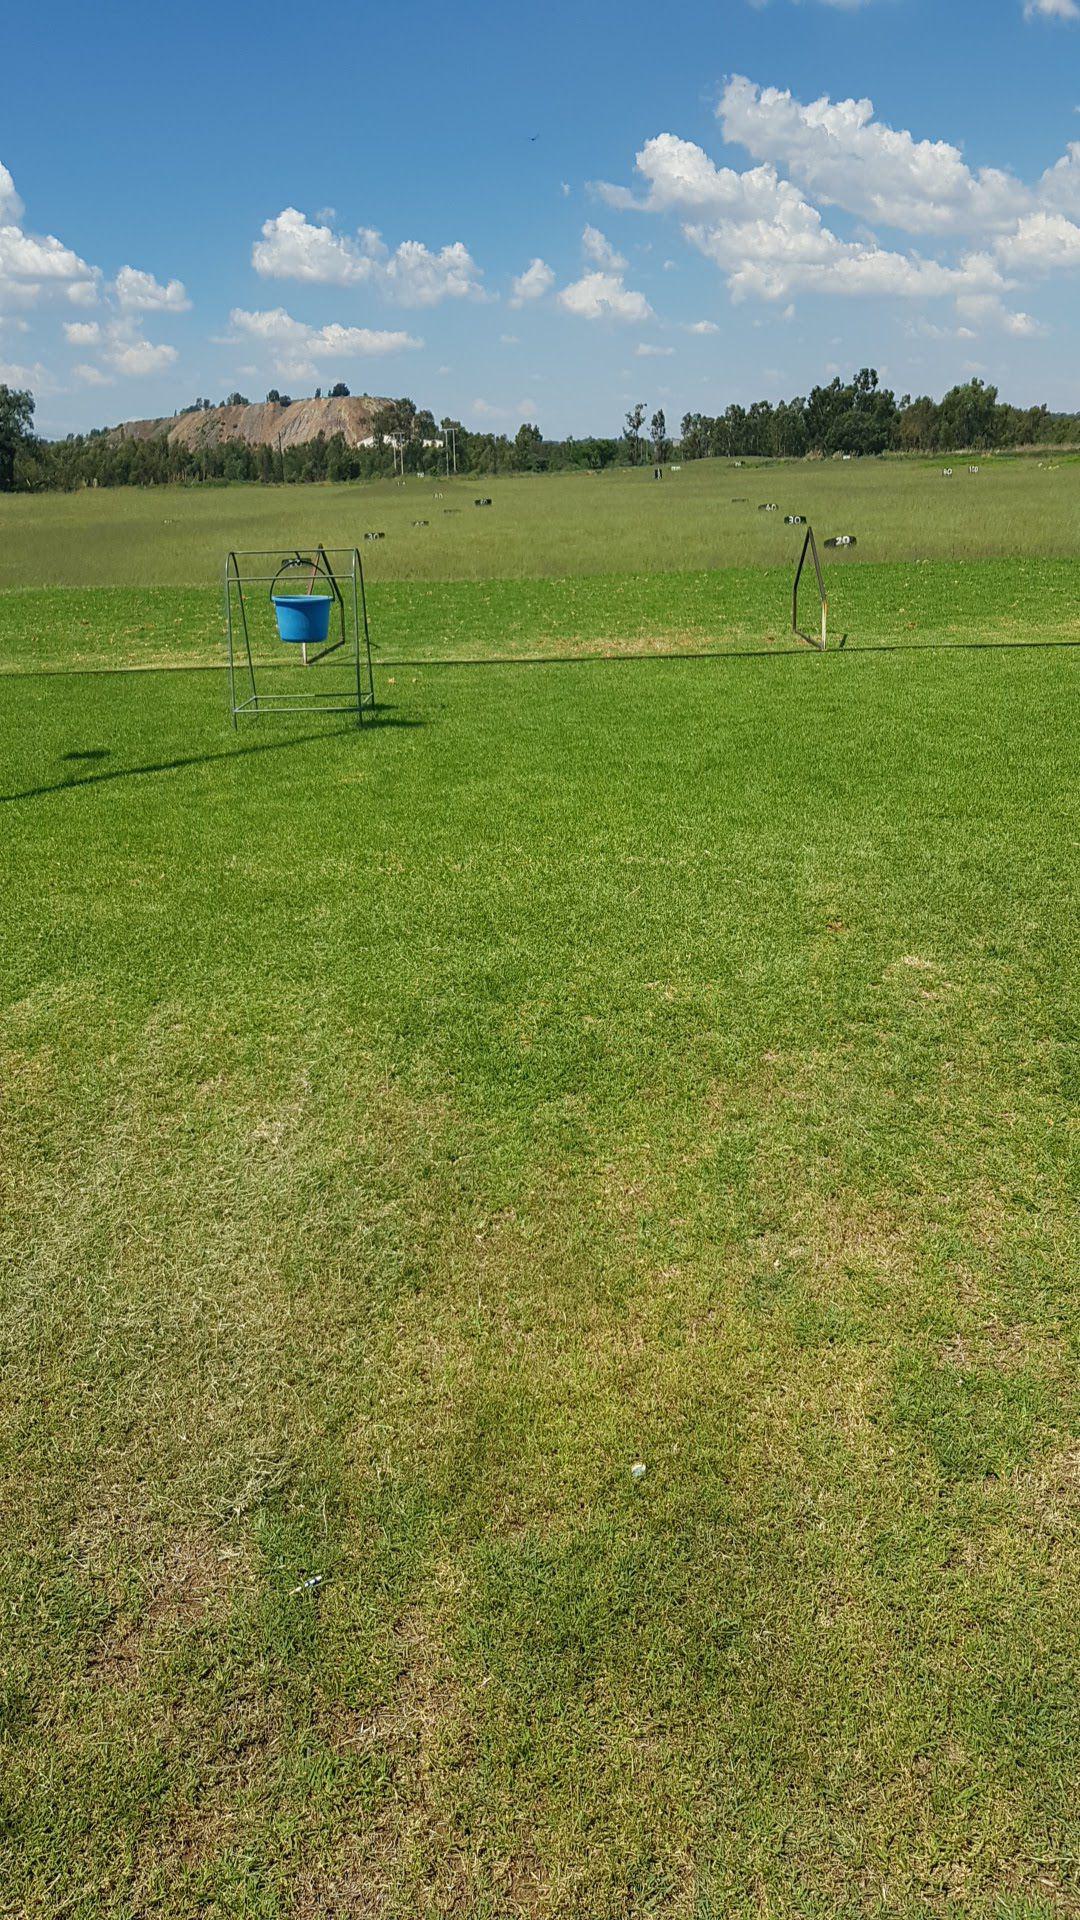 Nature, Complementary Colors, Ball Game, Sport, Golfing, Ball, Field, Agriculture, Lowland, Randfontein Golf Driving Range, nameless, Uitvalfontein, Randfontein, 1730